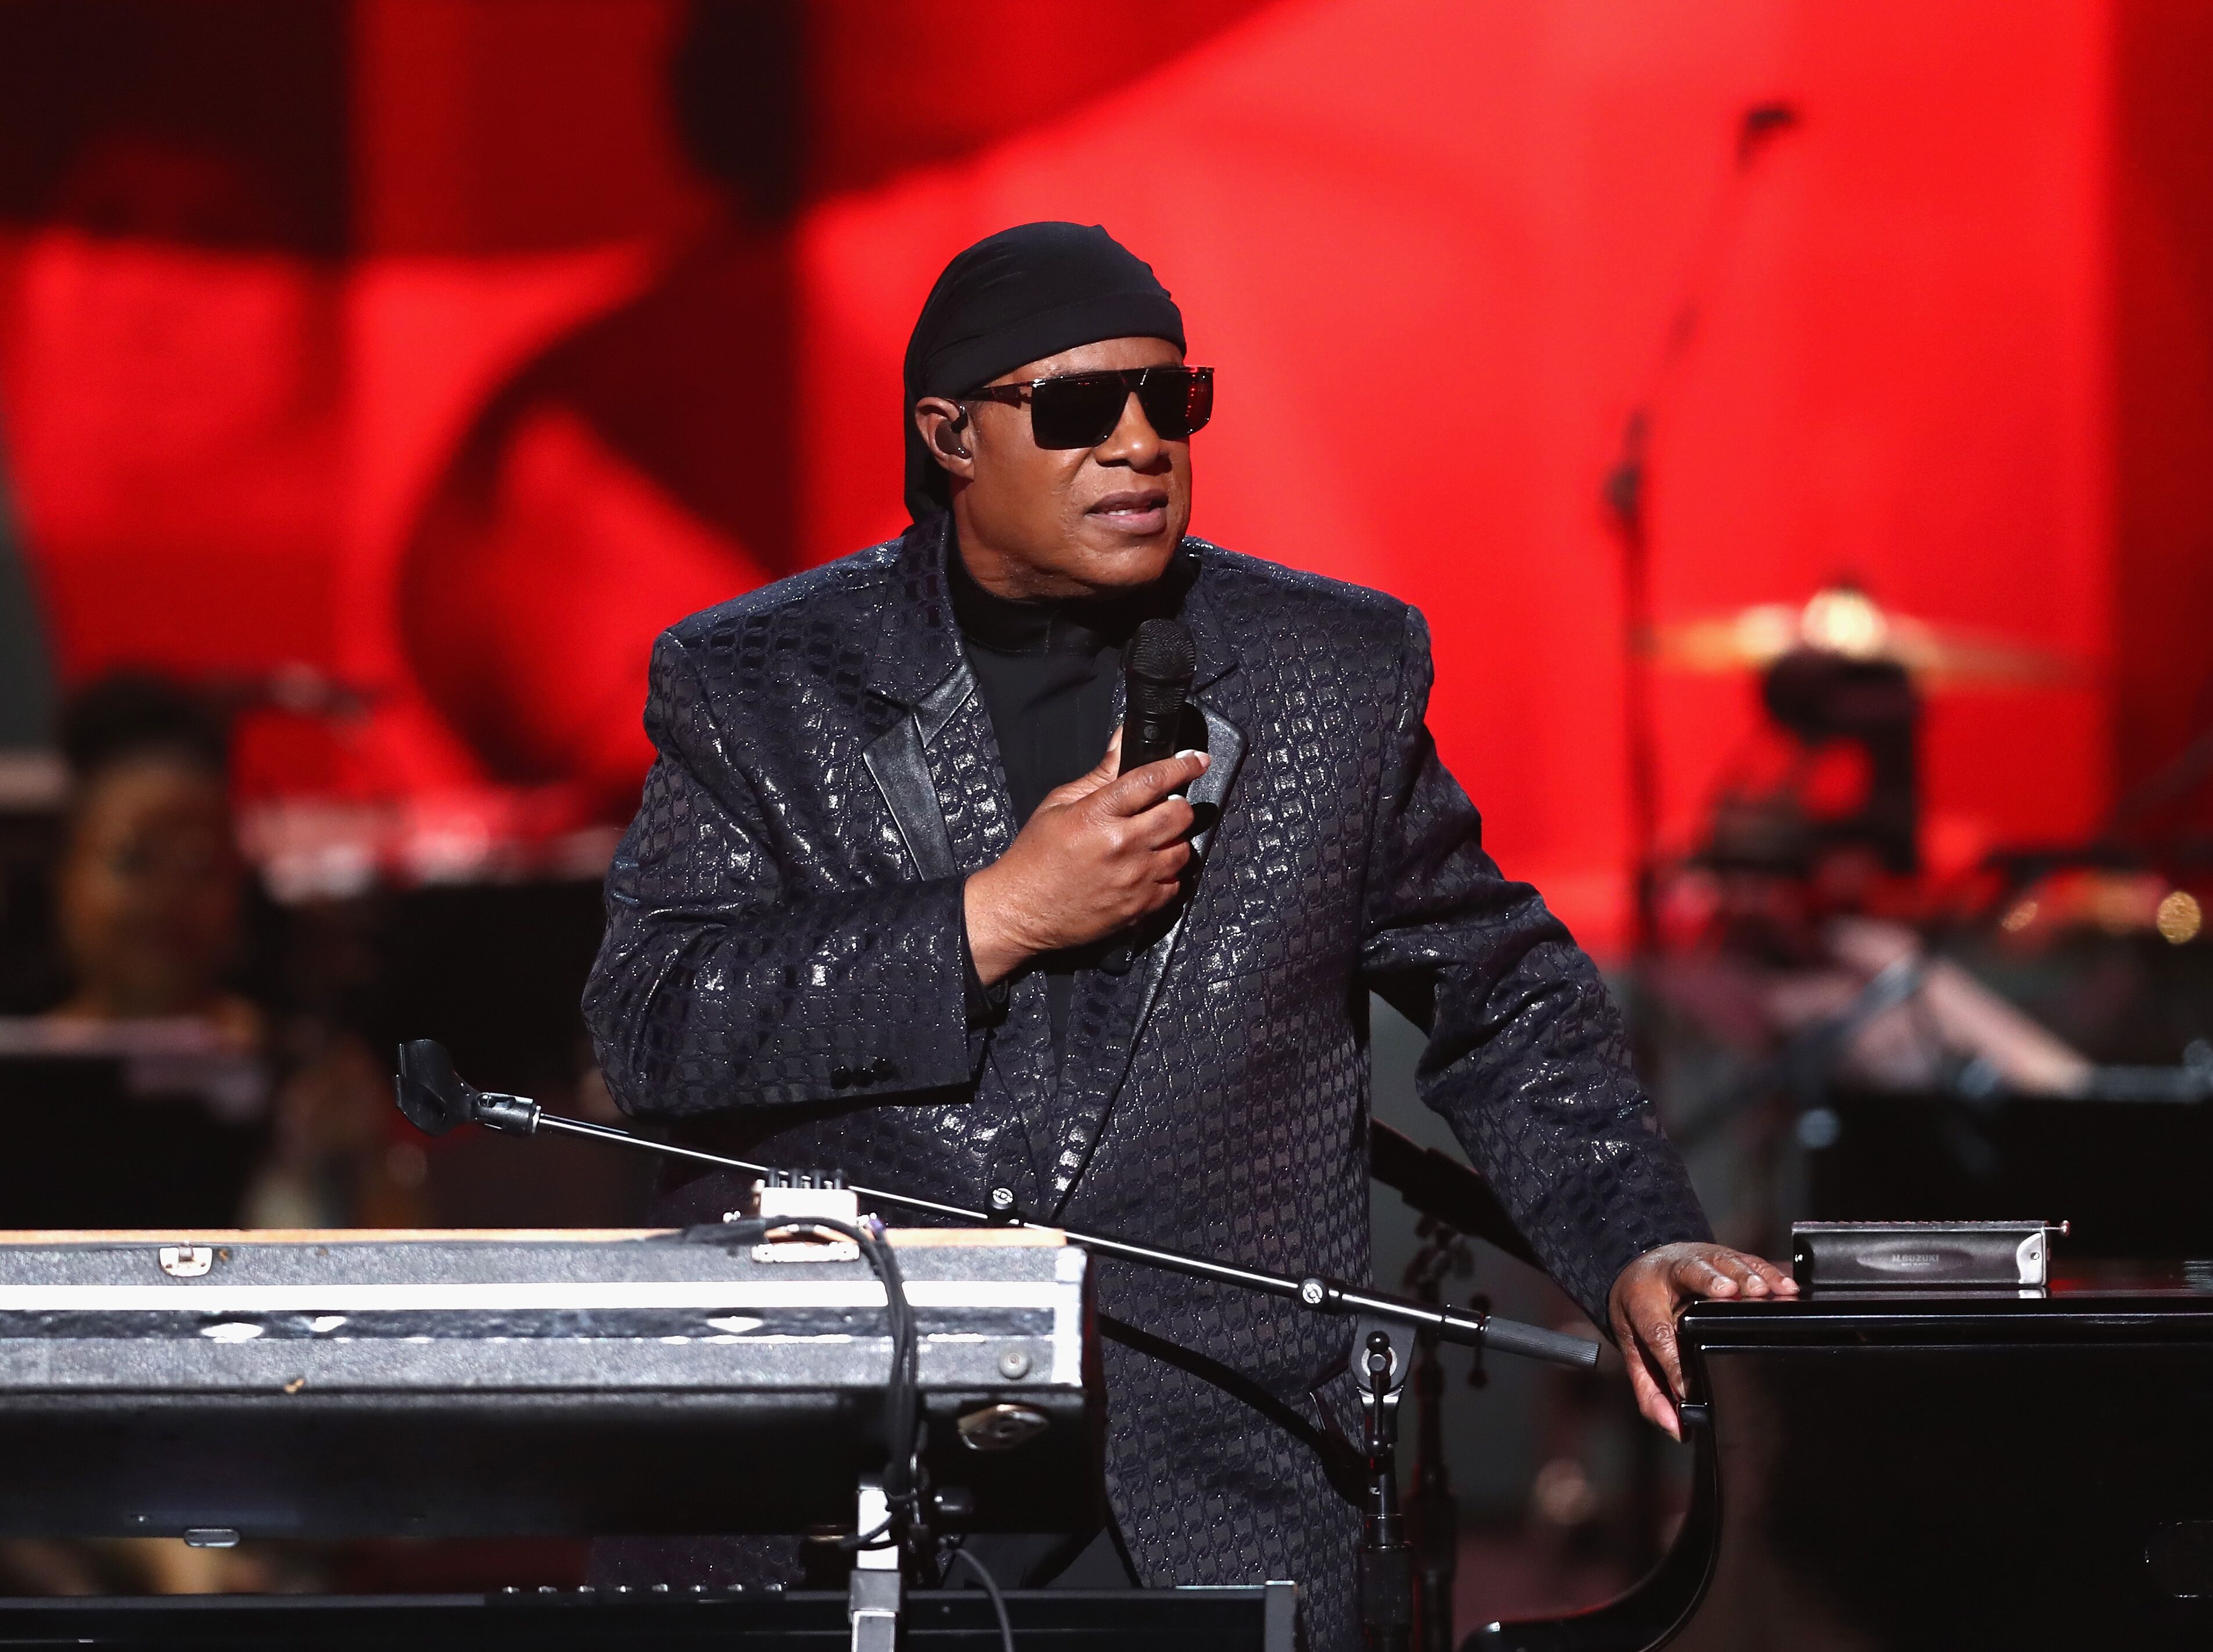 Stevie Wonder performs onstage during Motown 60: A GRAMMY Celebration on February 12, 2019 in Los Angeles, California. | Photo: Getty Images